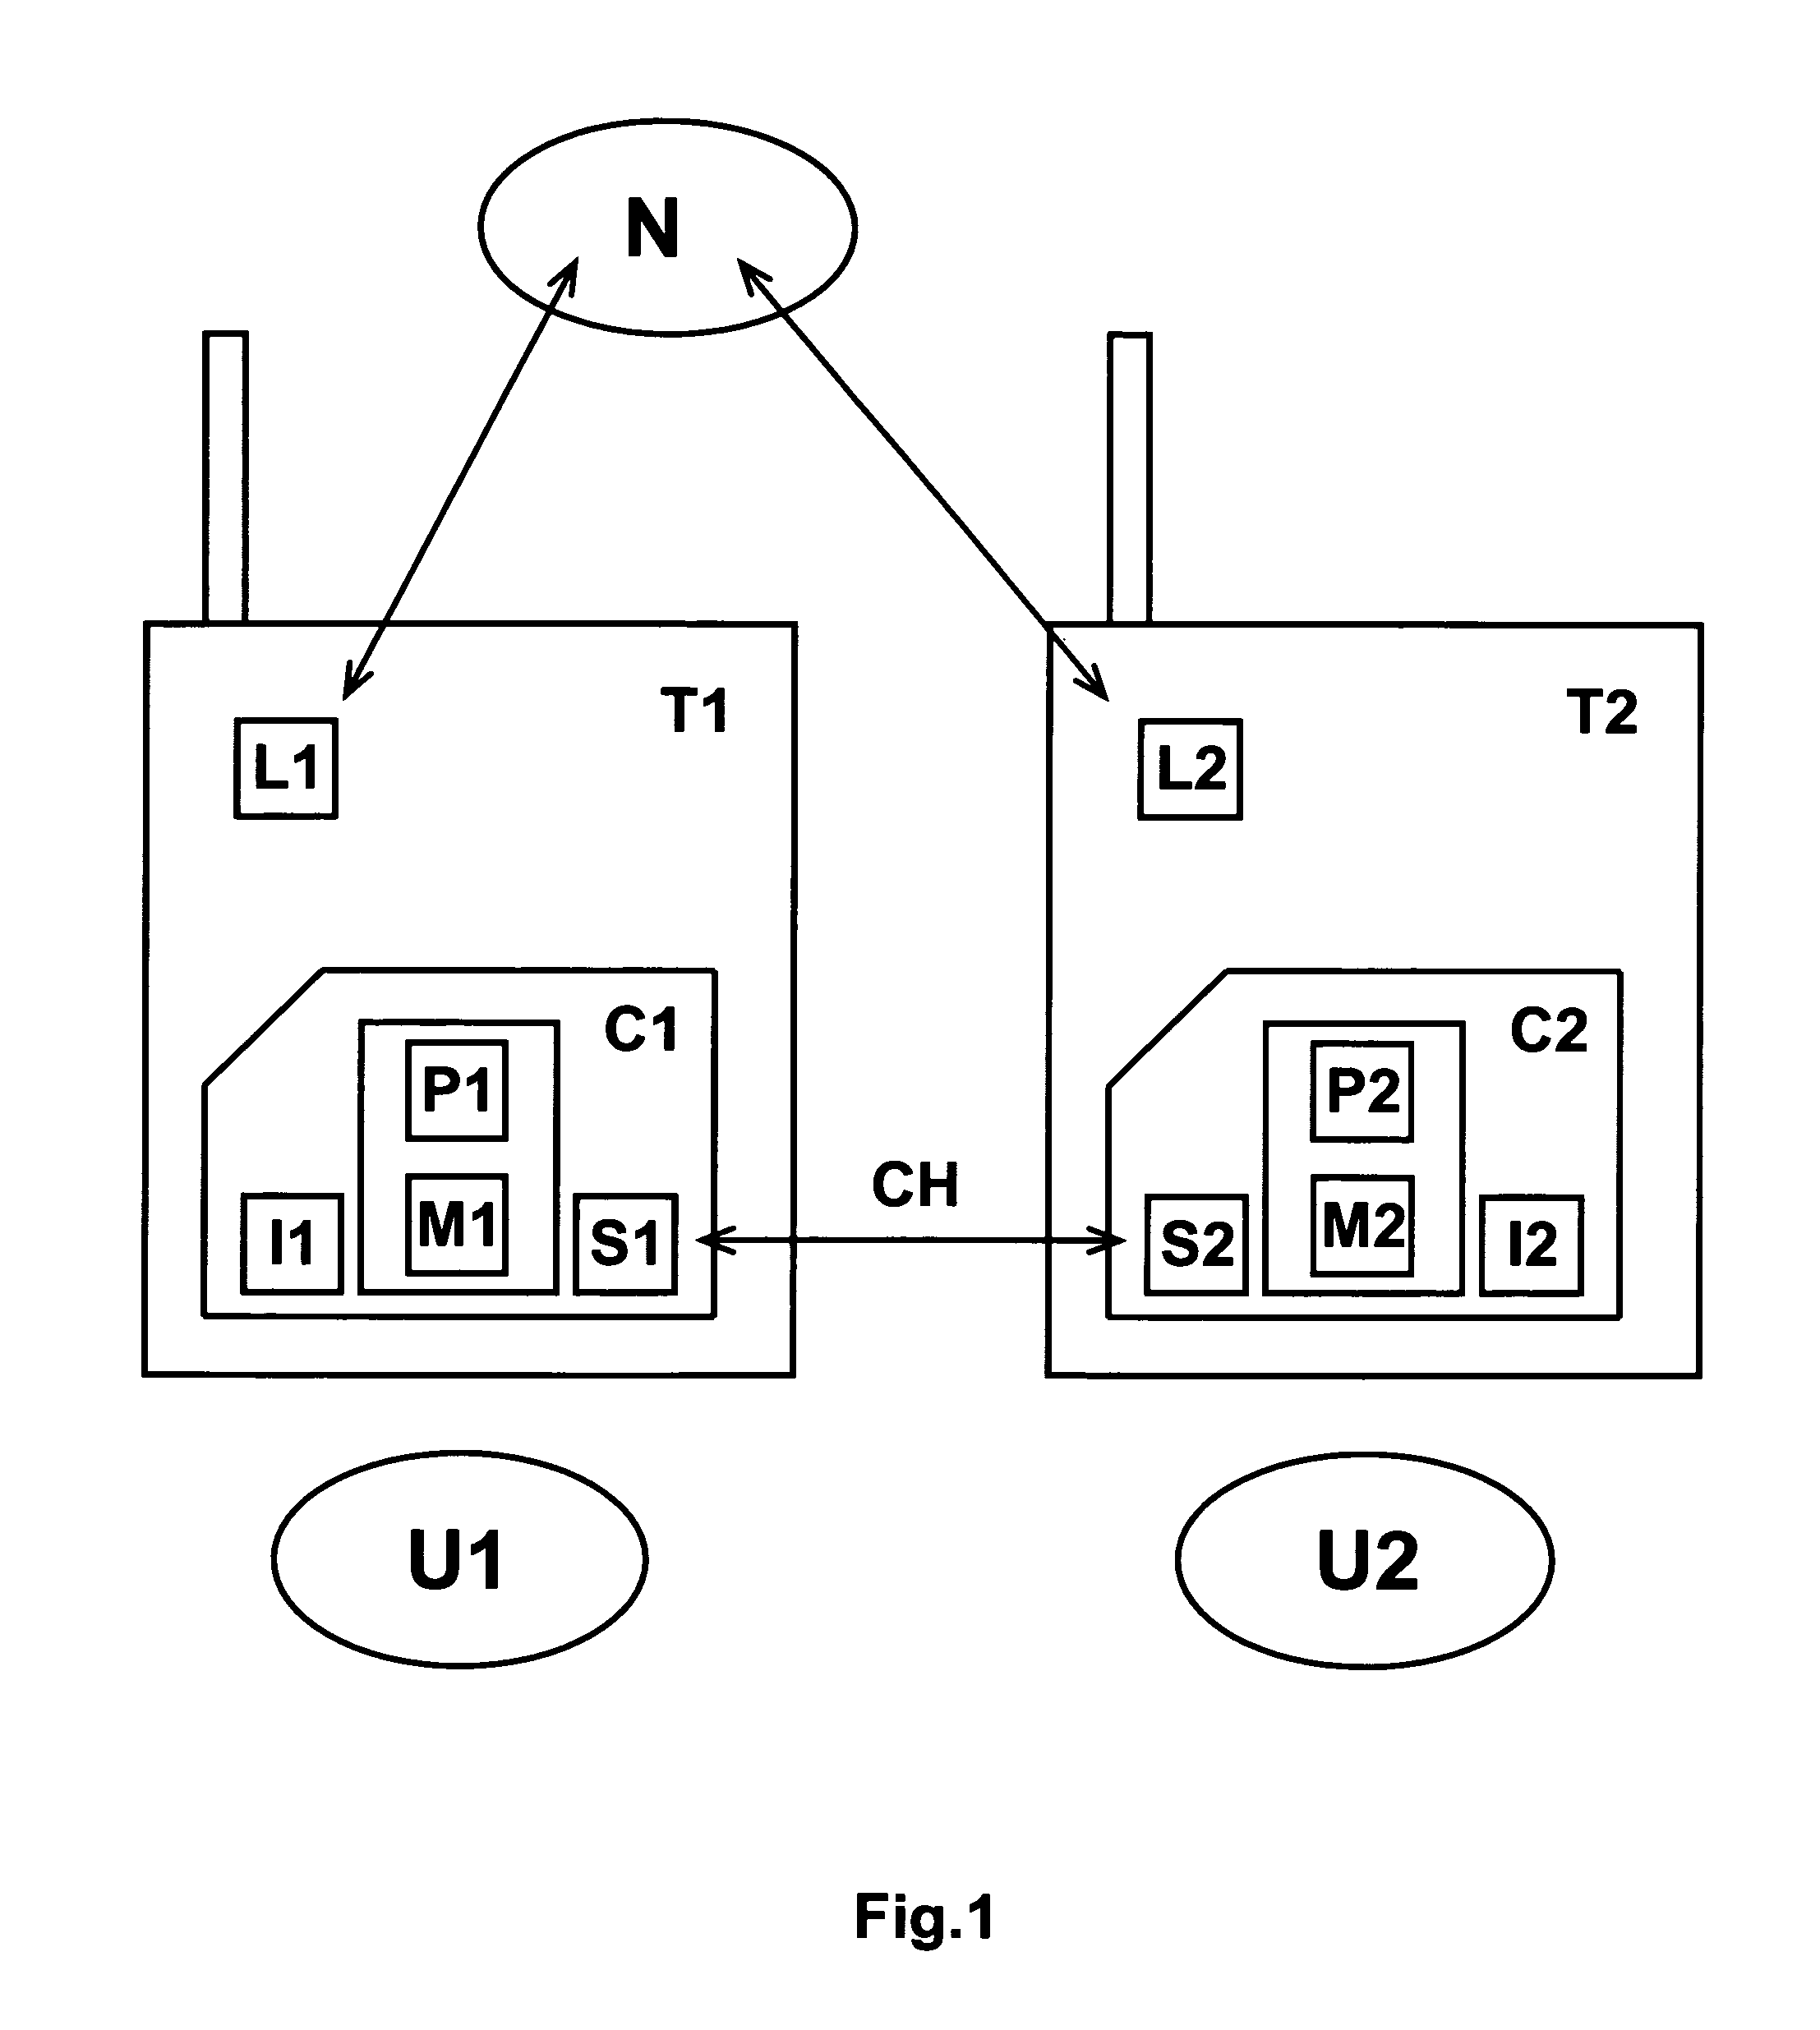 Method and subscriber identification card for using a service through a mobile telephone terminal using resources of another mobile telephone terminal